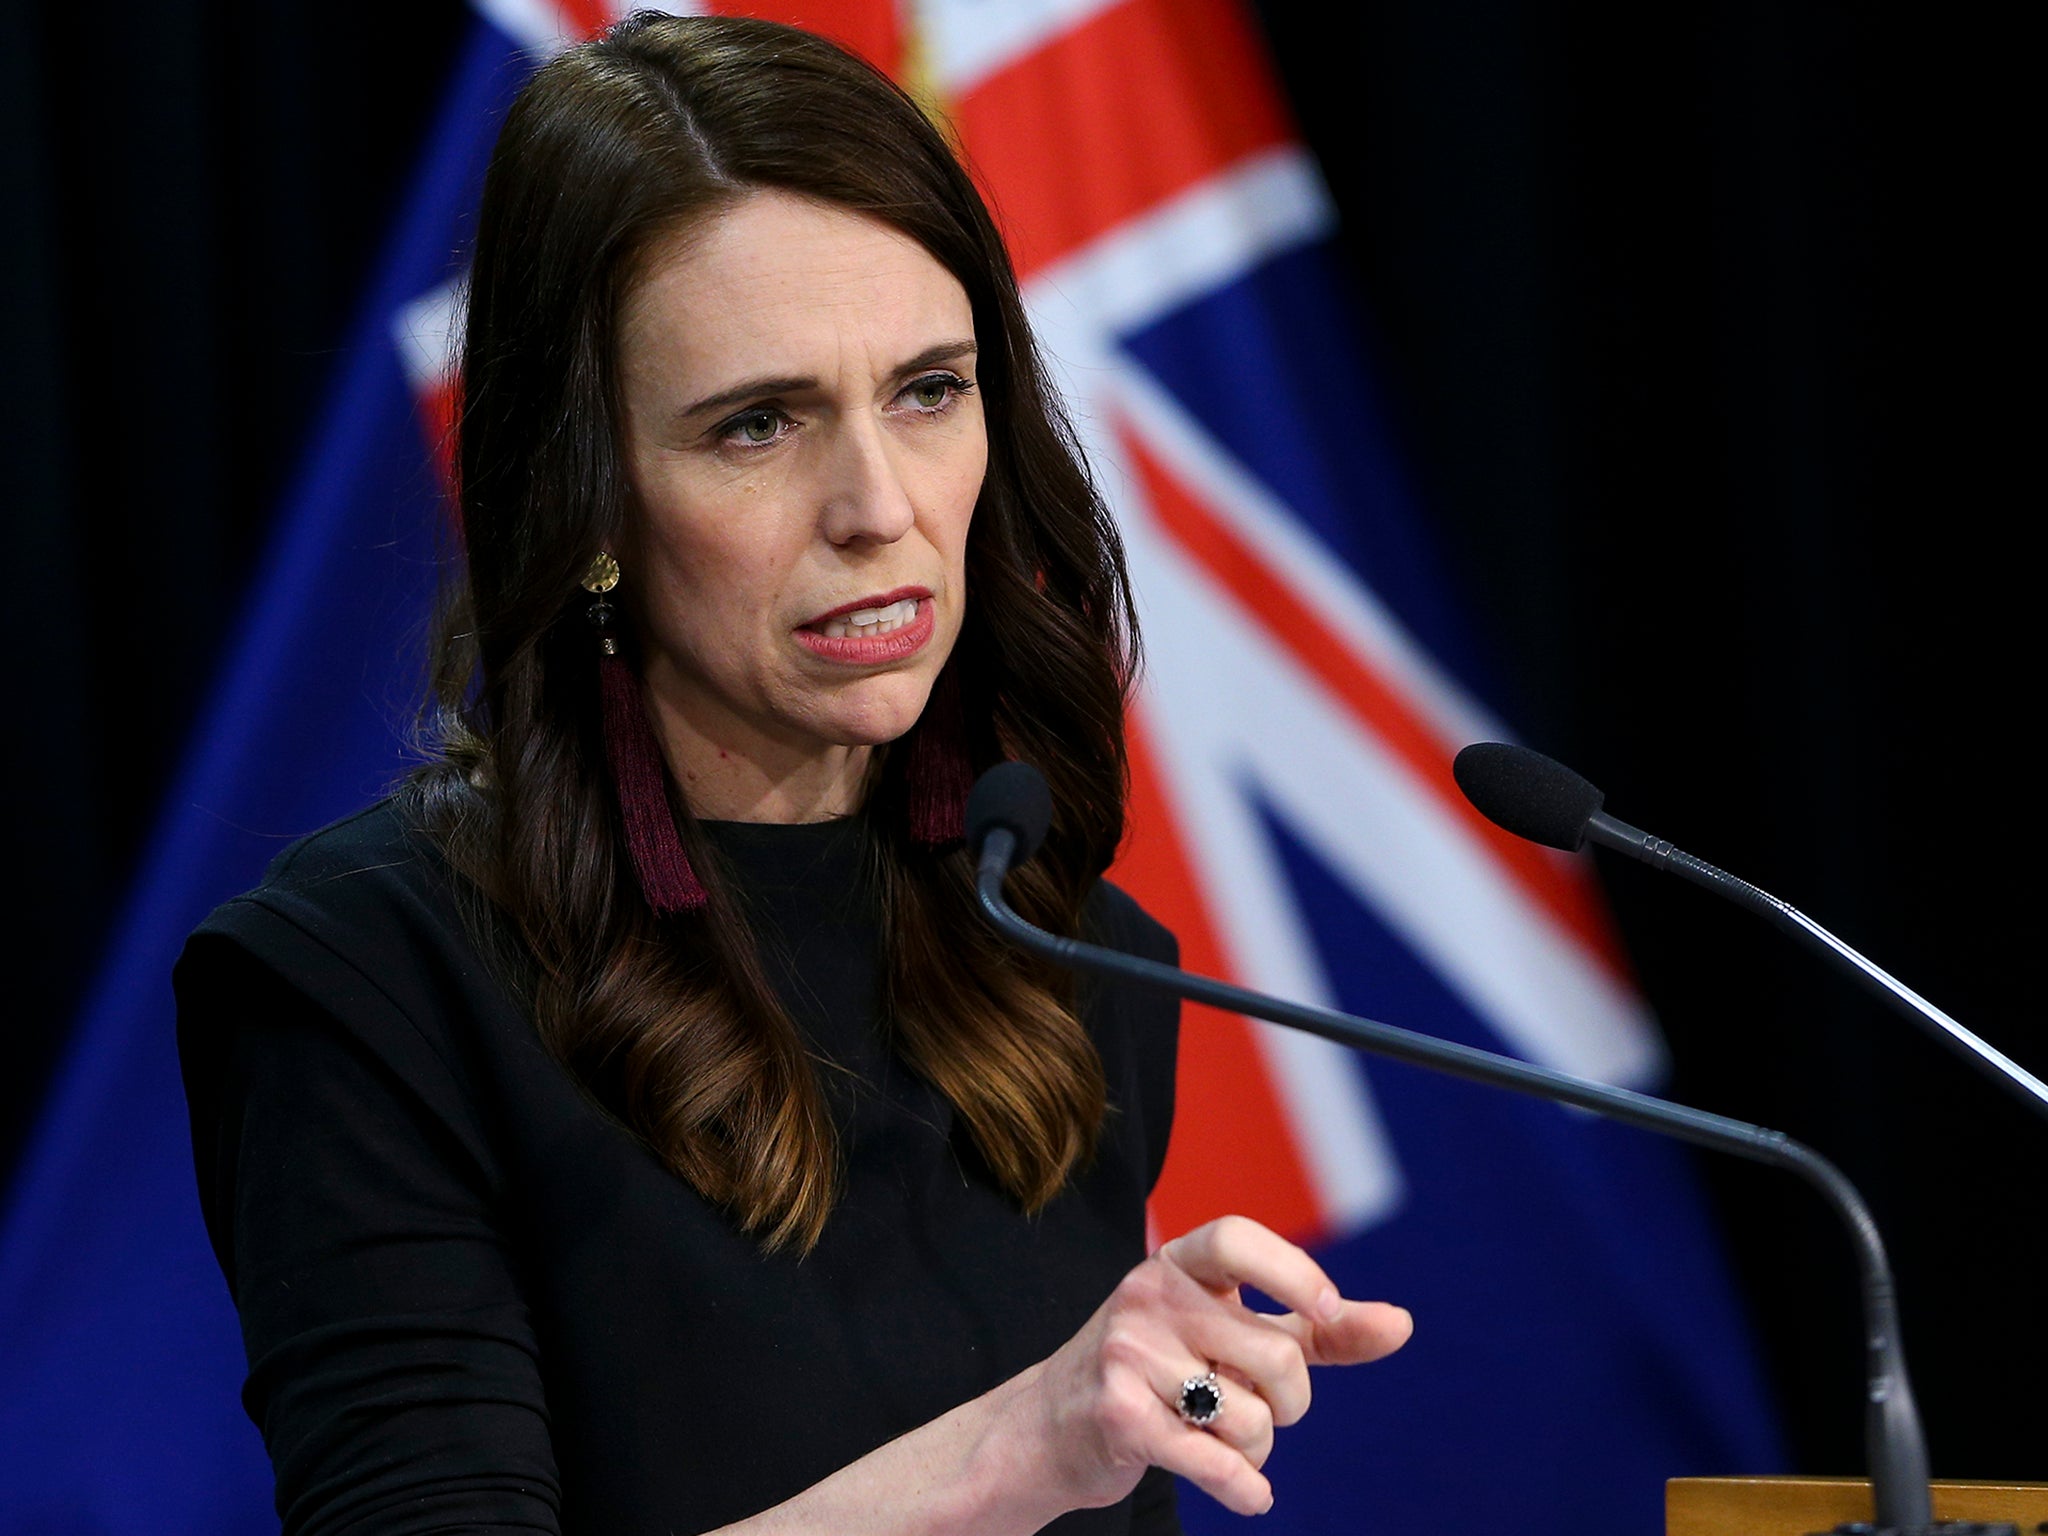 New Zealand will follow other countries including the UK, France, Canada and Japan in declaring a climate emergency